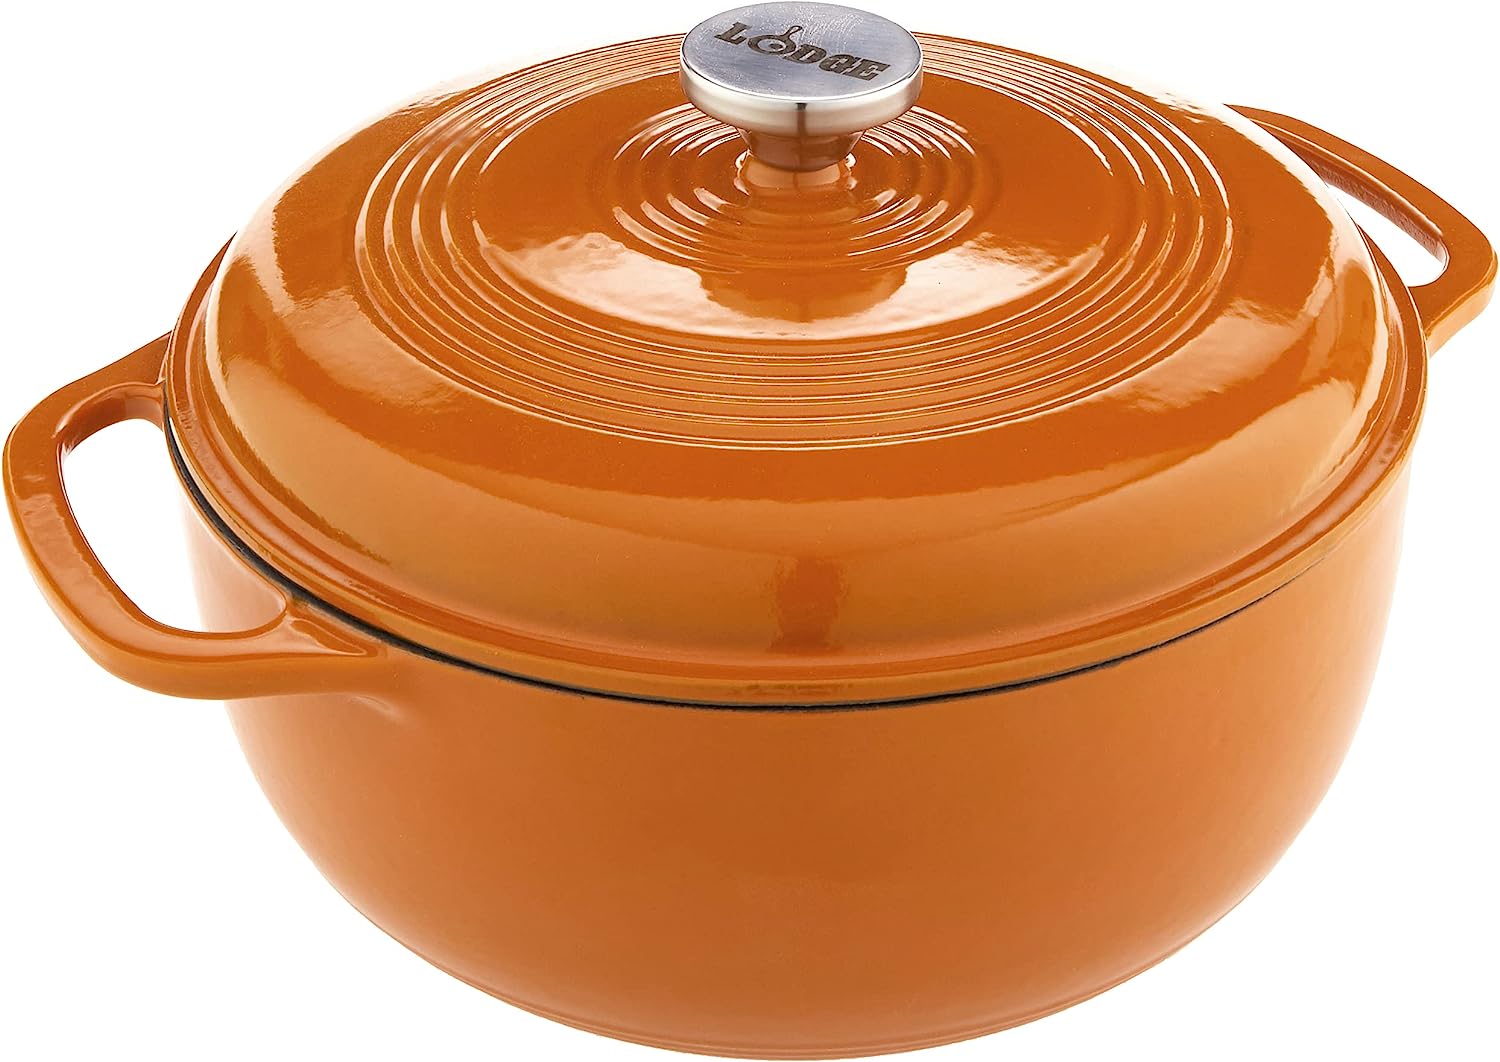 Lodge 6 Quart Enameled Cast Iron Dutch Oven with Lid – Dual Handles – Oven  Safe up to 500° F or on Stovetop - Use to Marinate, Cook, Bake, Refrigerate  and Serve – Apricot